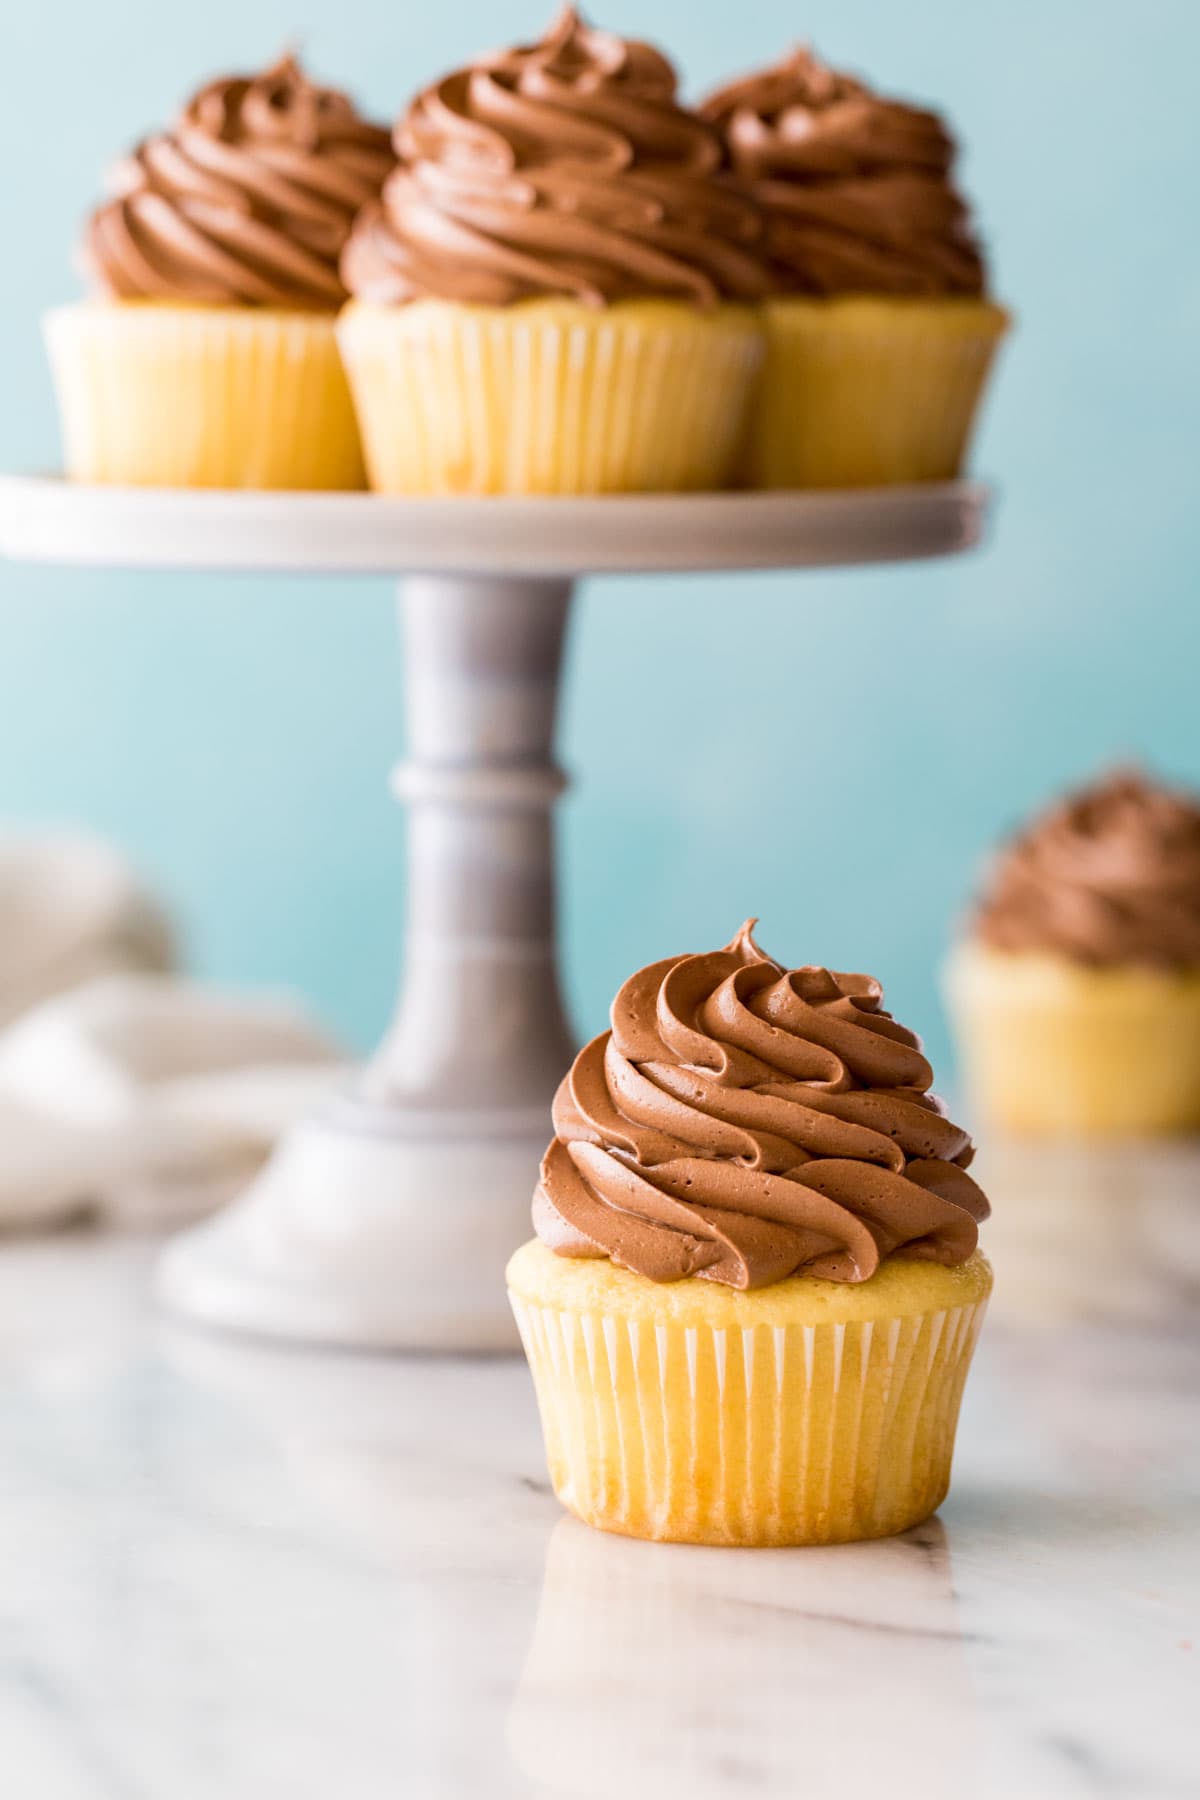 chocolate frosted yellow cupcake beneath a cake stand of more cupcakes